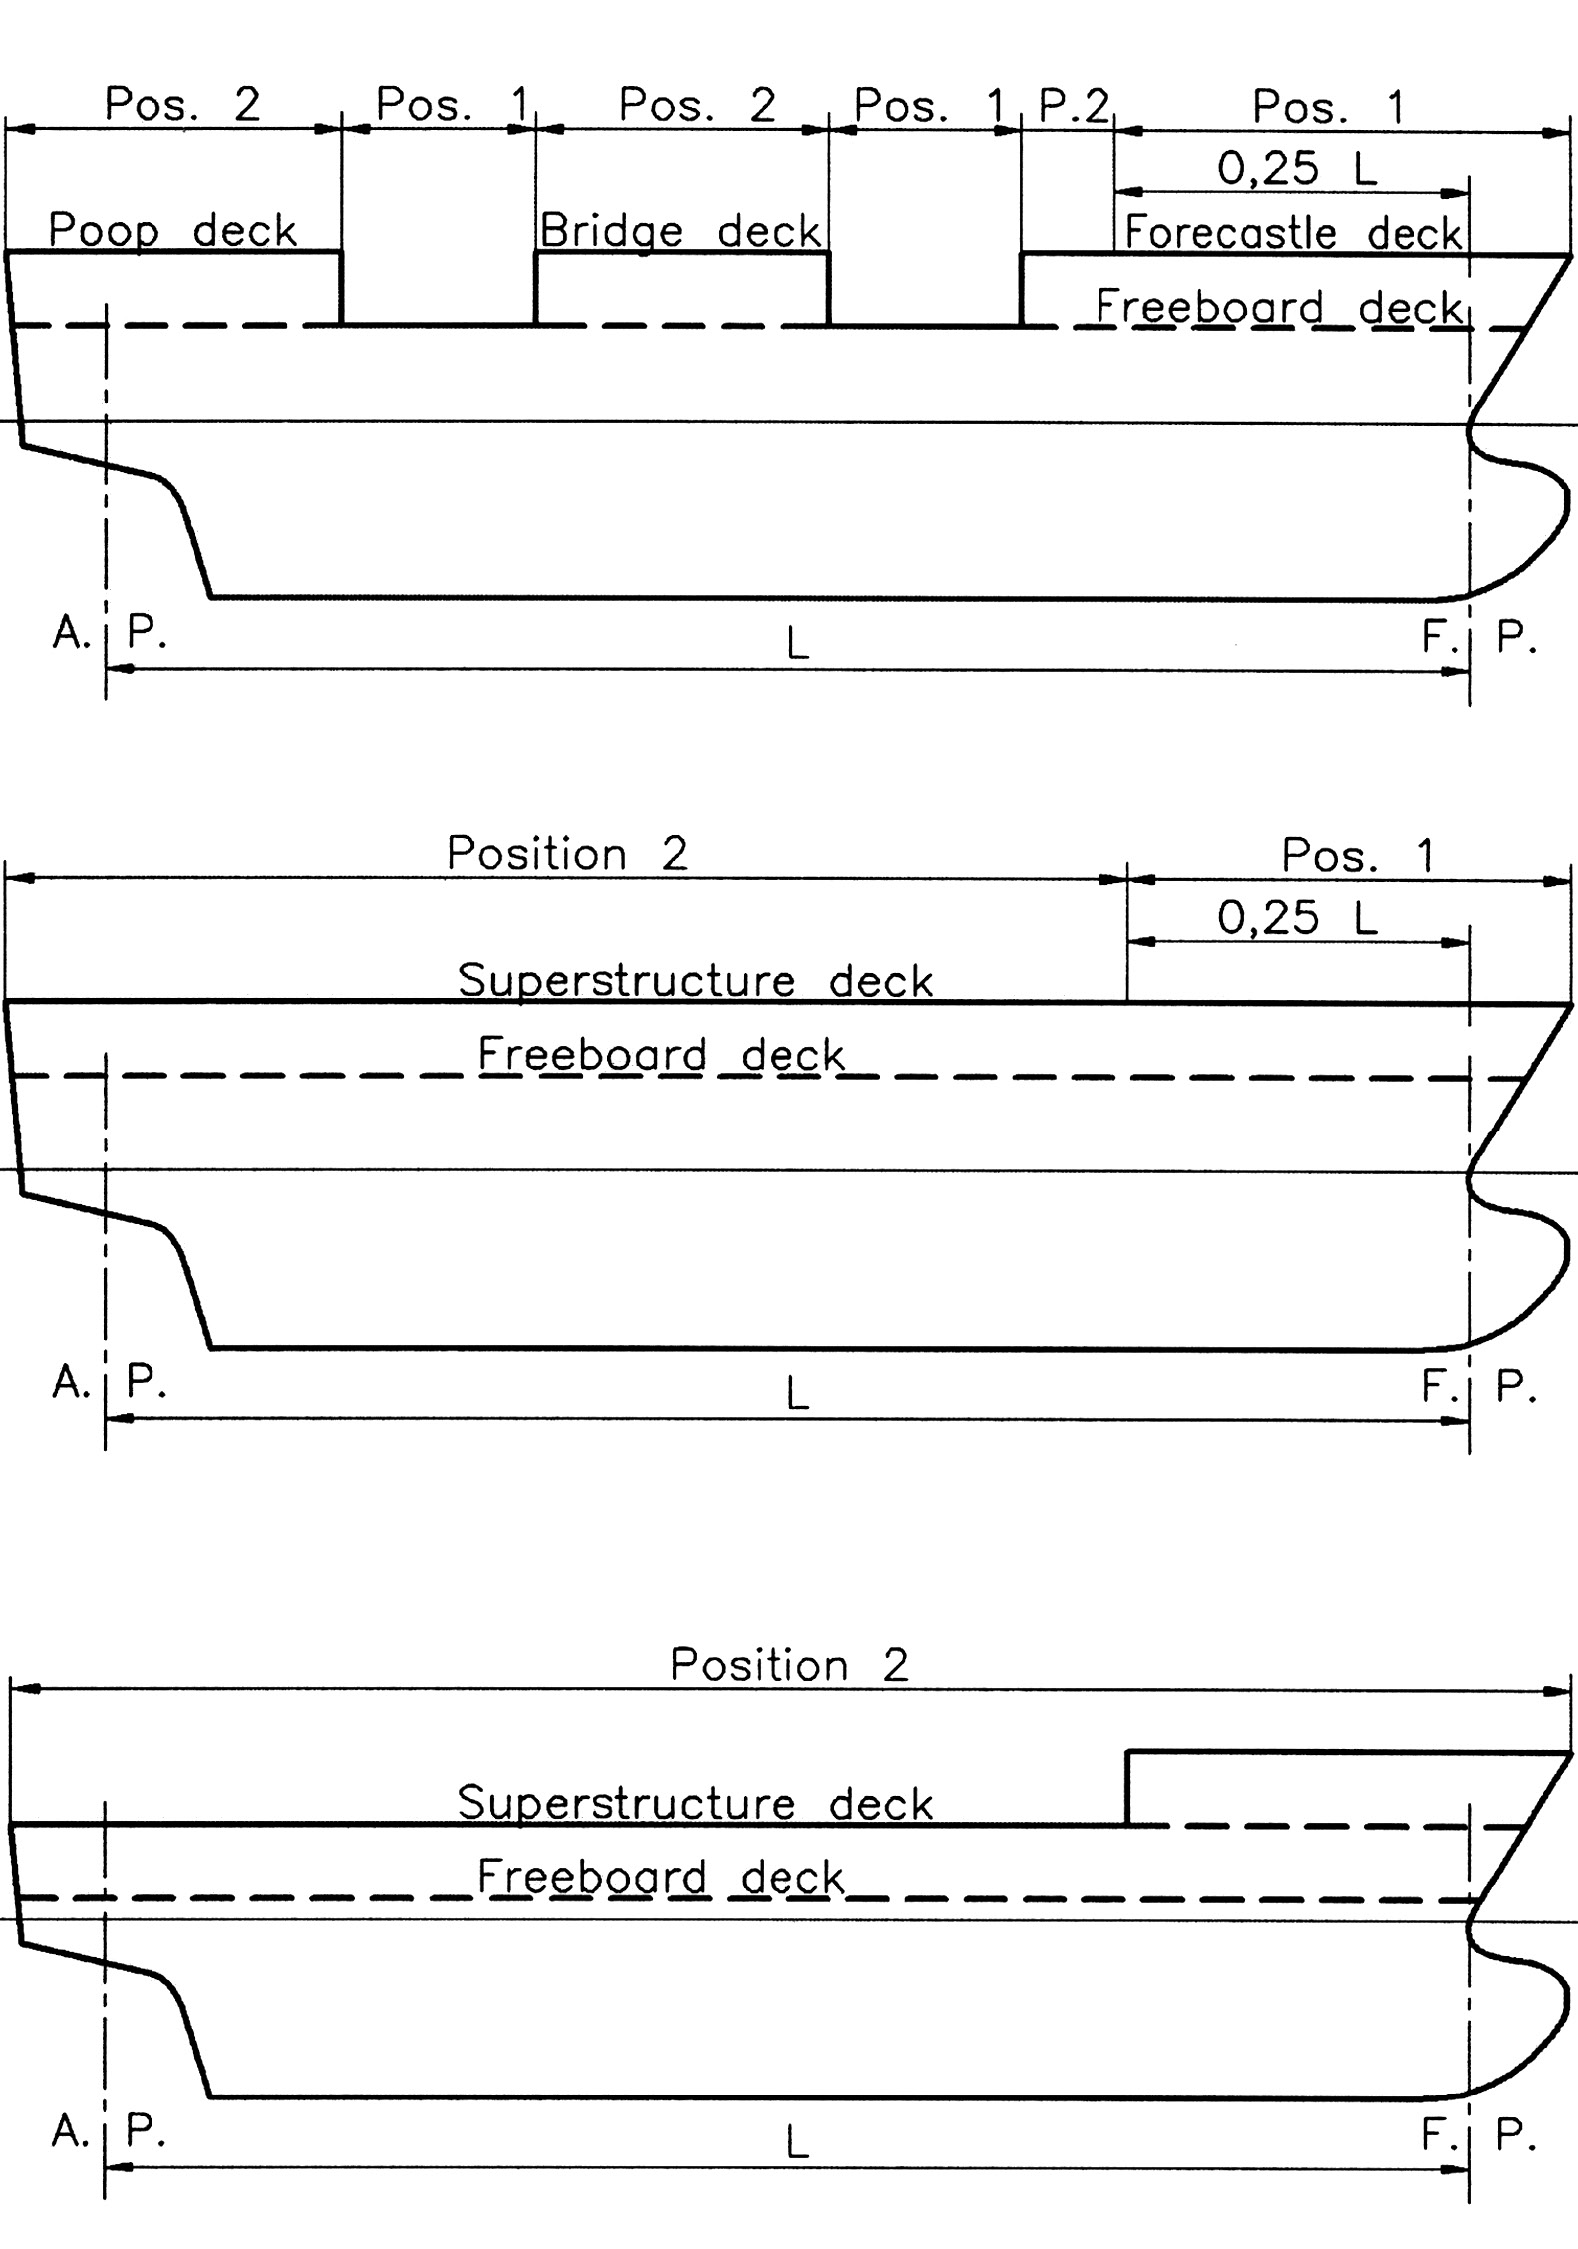 International Convention on Load Lines; Positions 